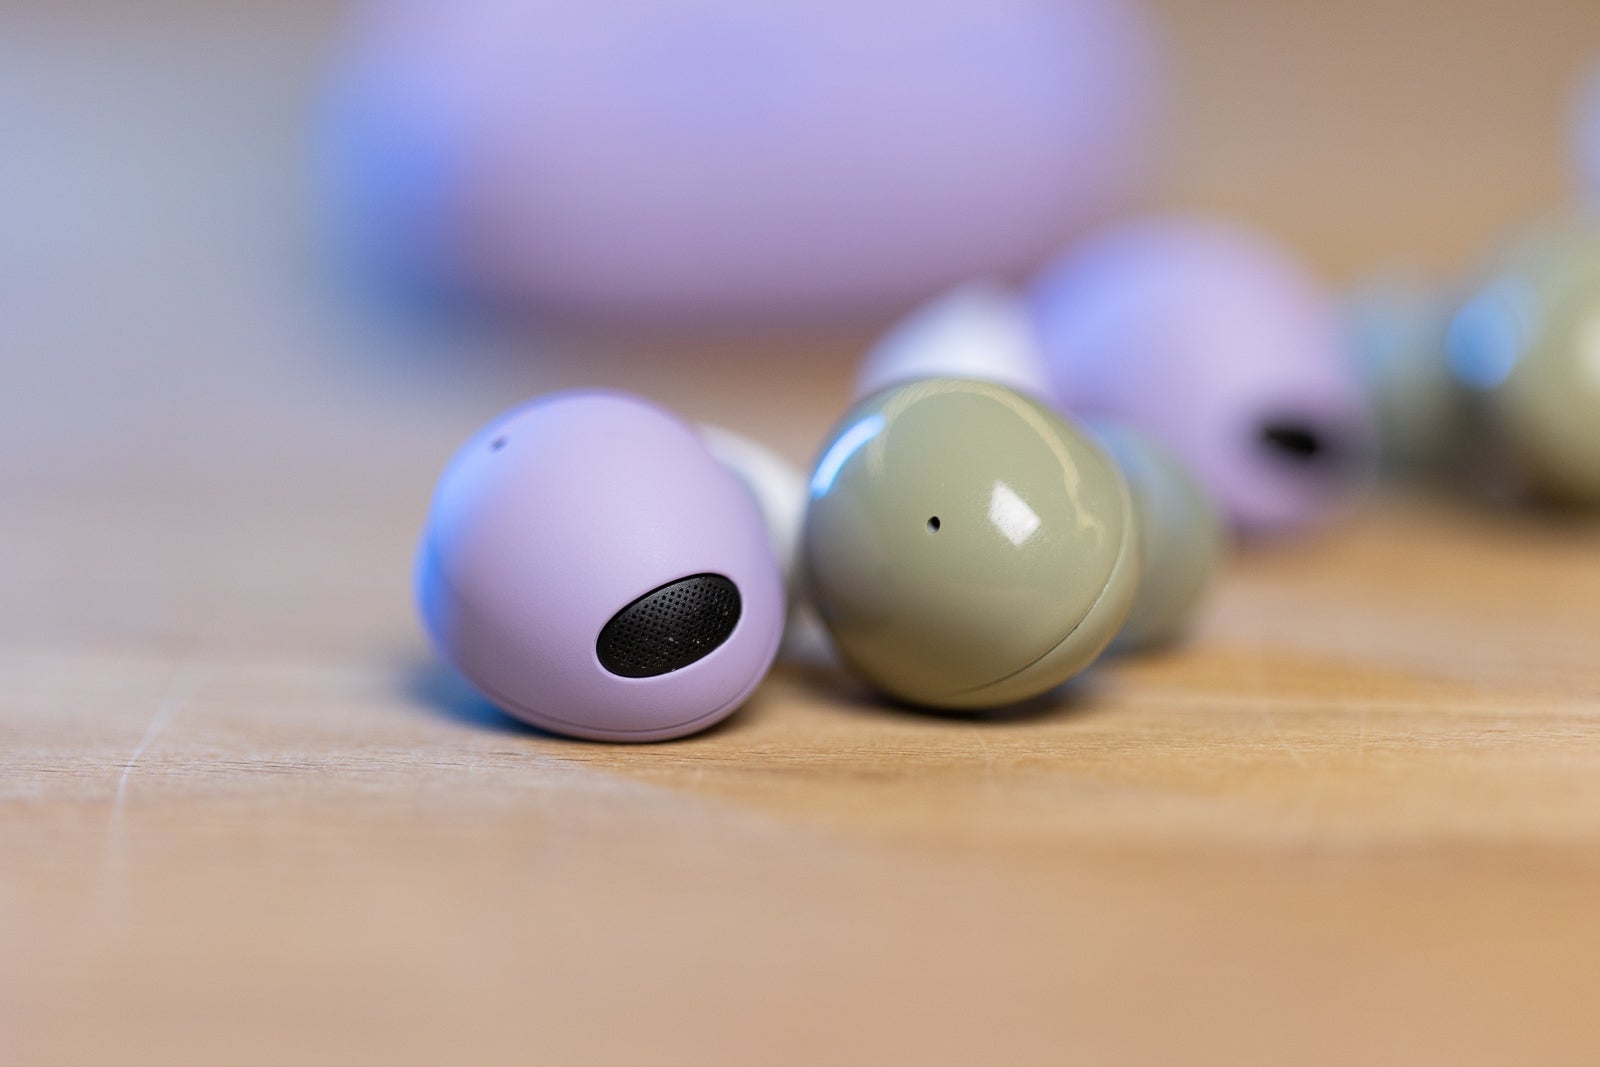 (Image credit - PhoneArena) Galaxy Buds 2 Pro earbud (left) and Galaxy Buds 2 (right) - Galaxy Buds 2 Pro vs Galaxy Buds 2: Can you hear a difference? Or even see it?